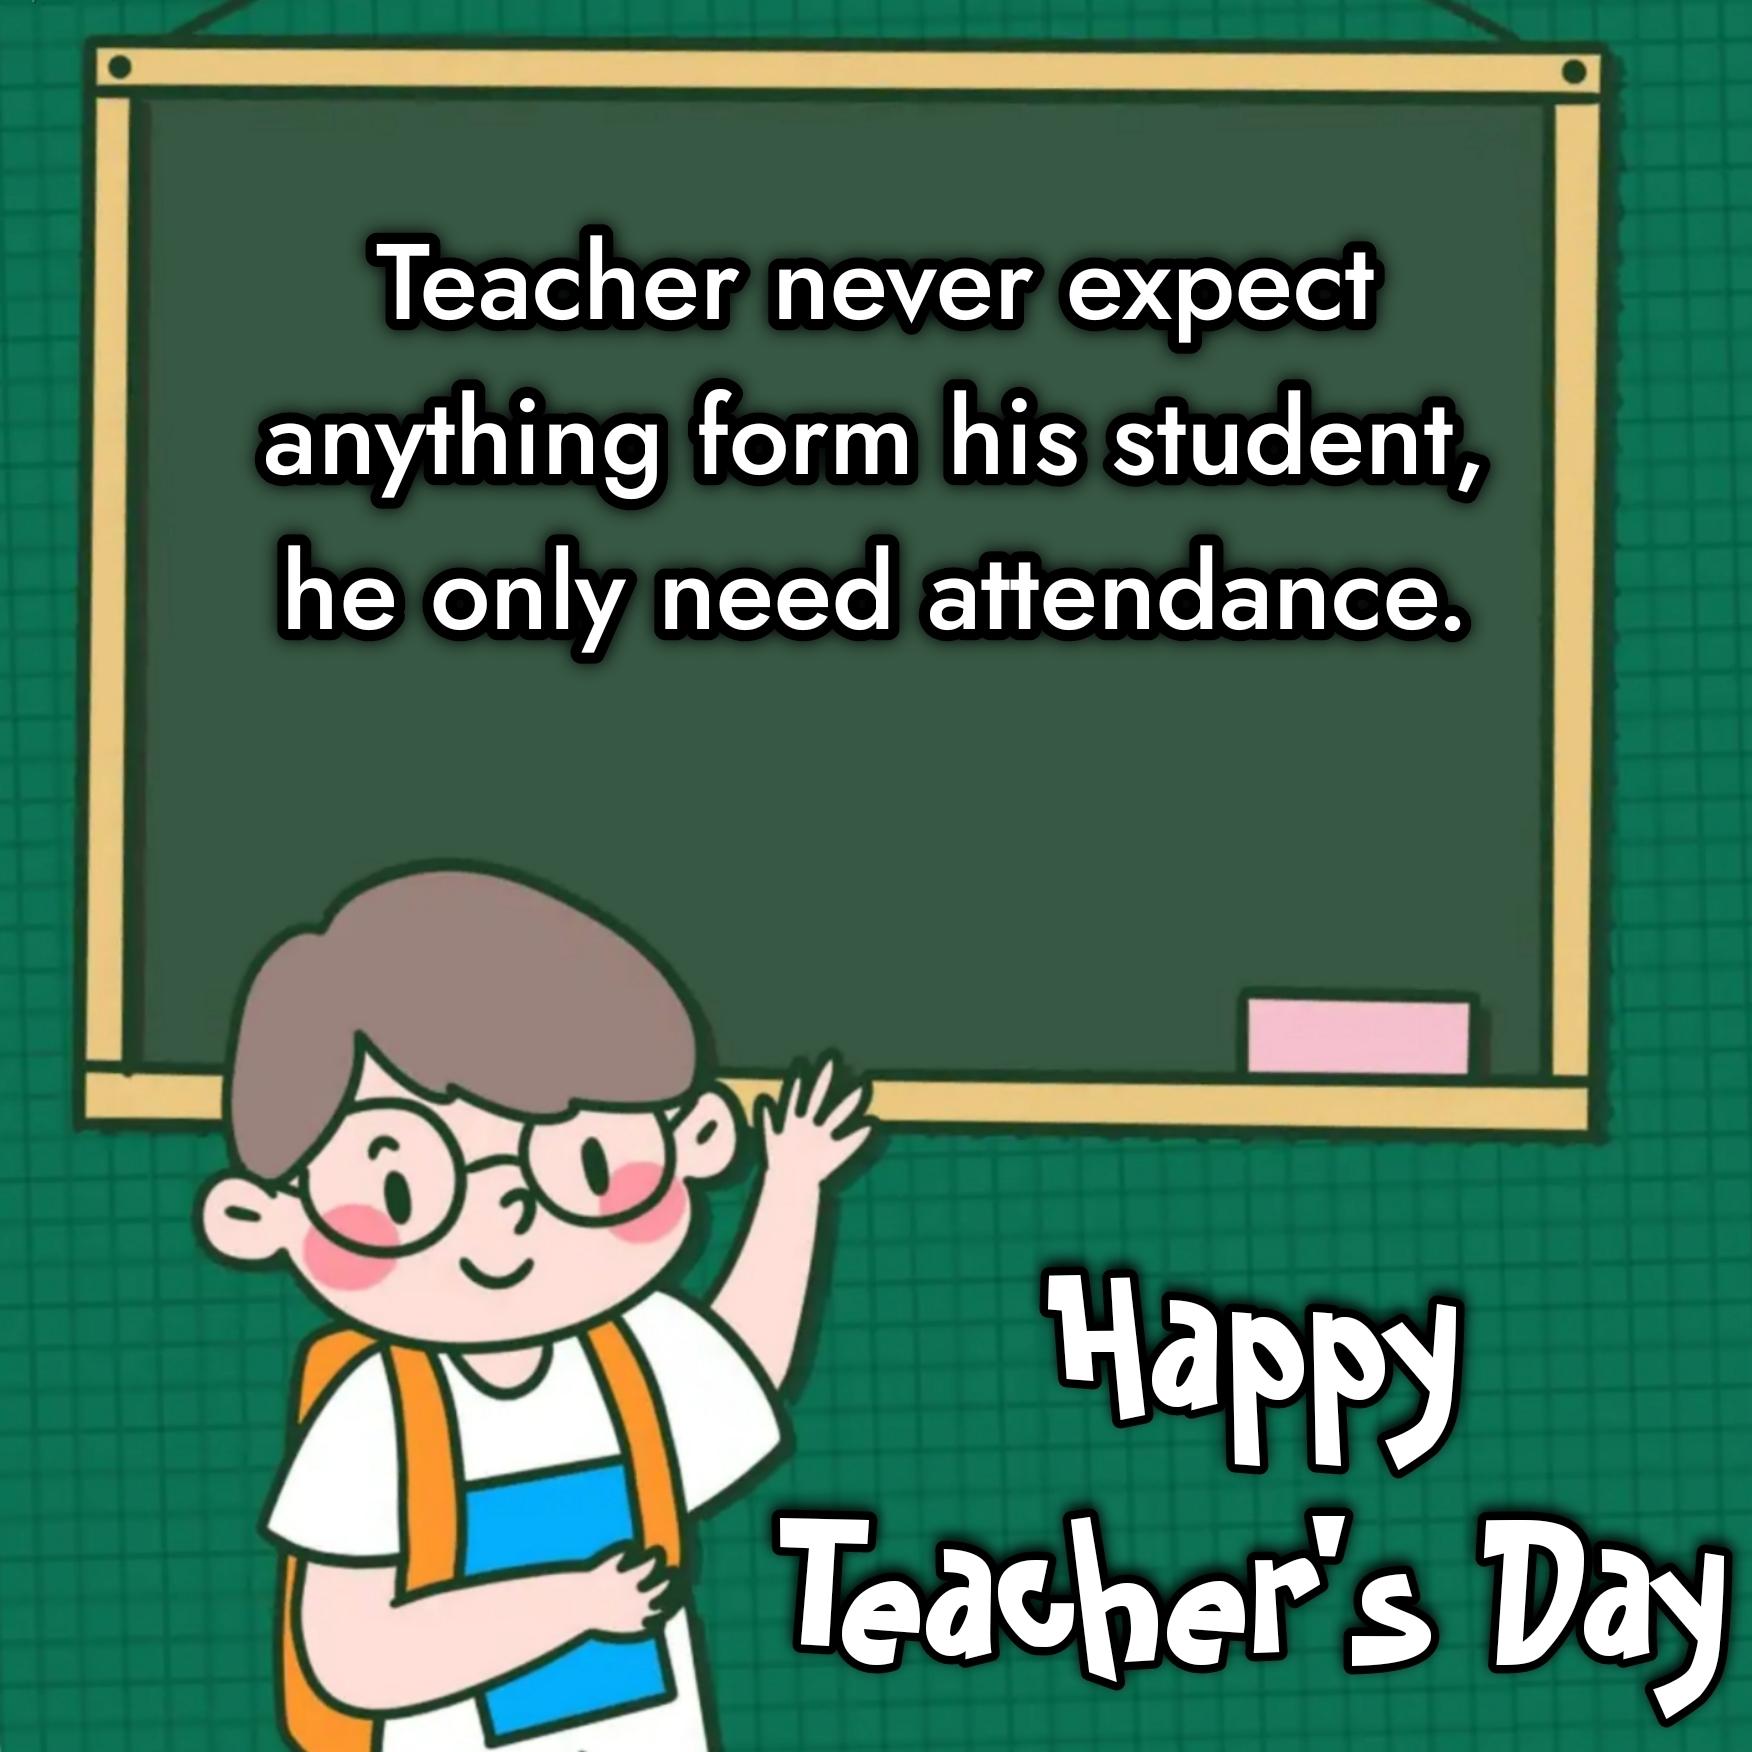 Teacher never expect anything form his student